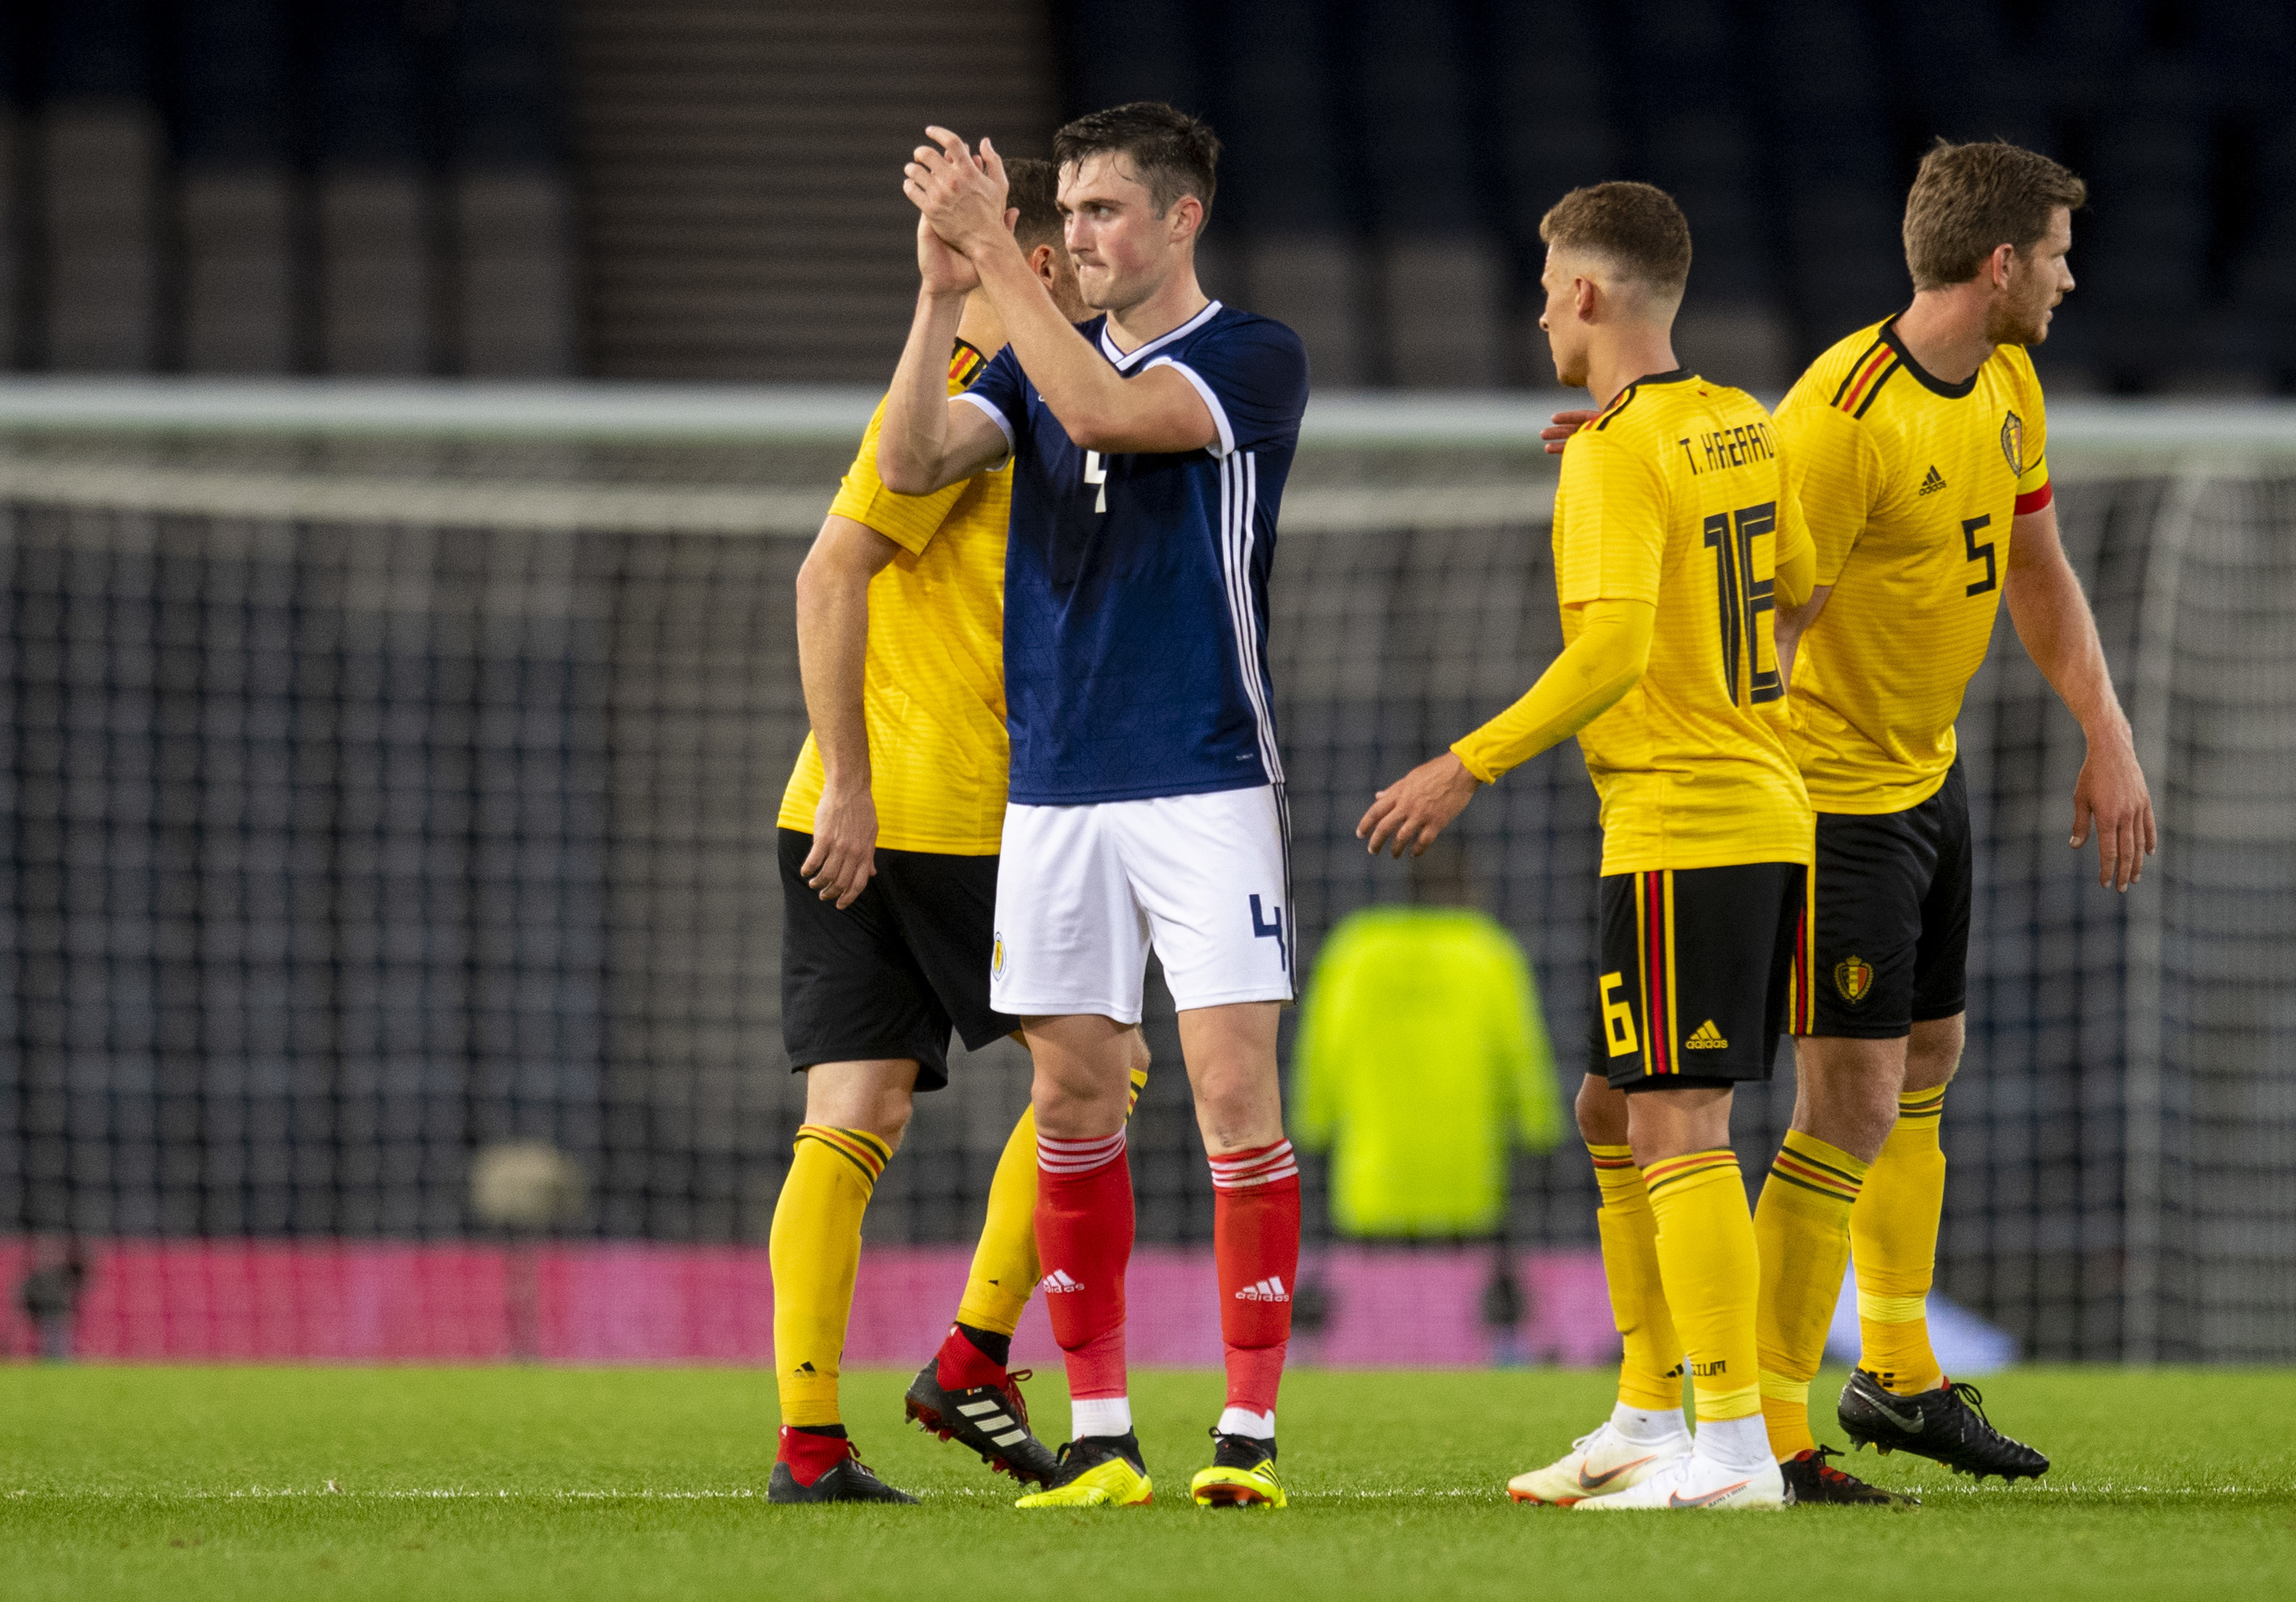 John Souttar made his debut for Scotland against Belgium on Friday.